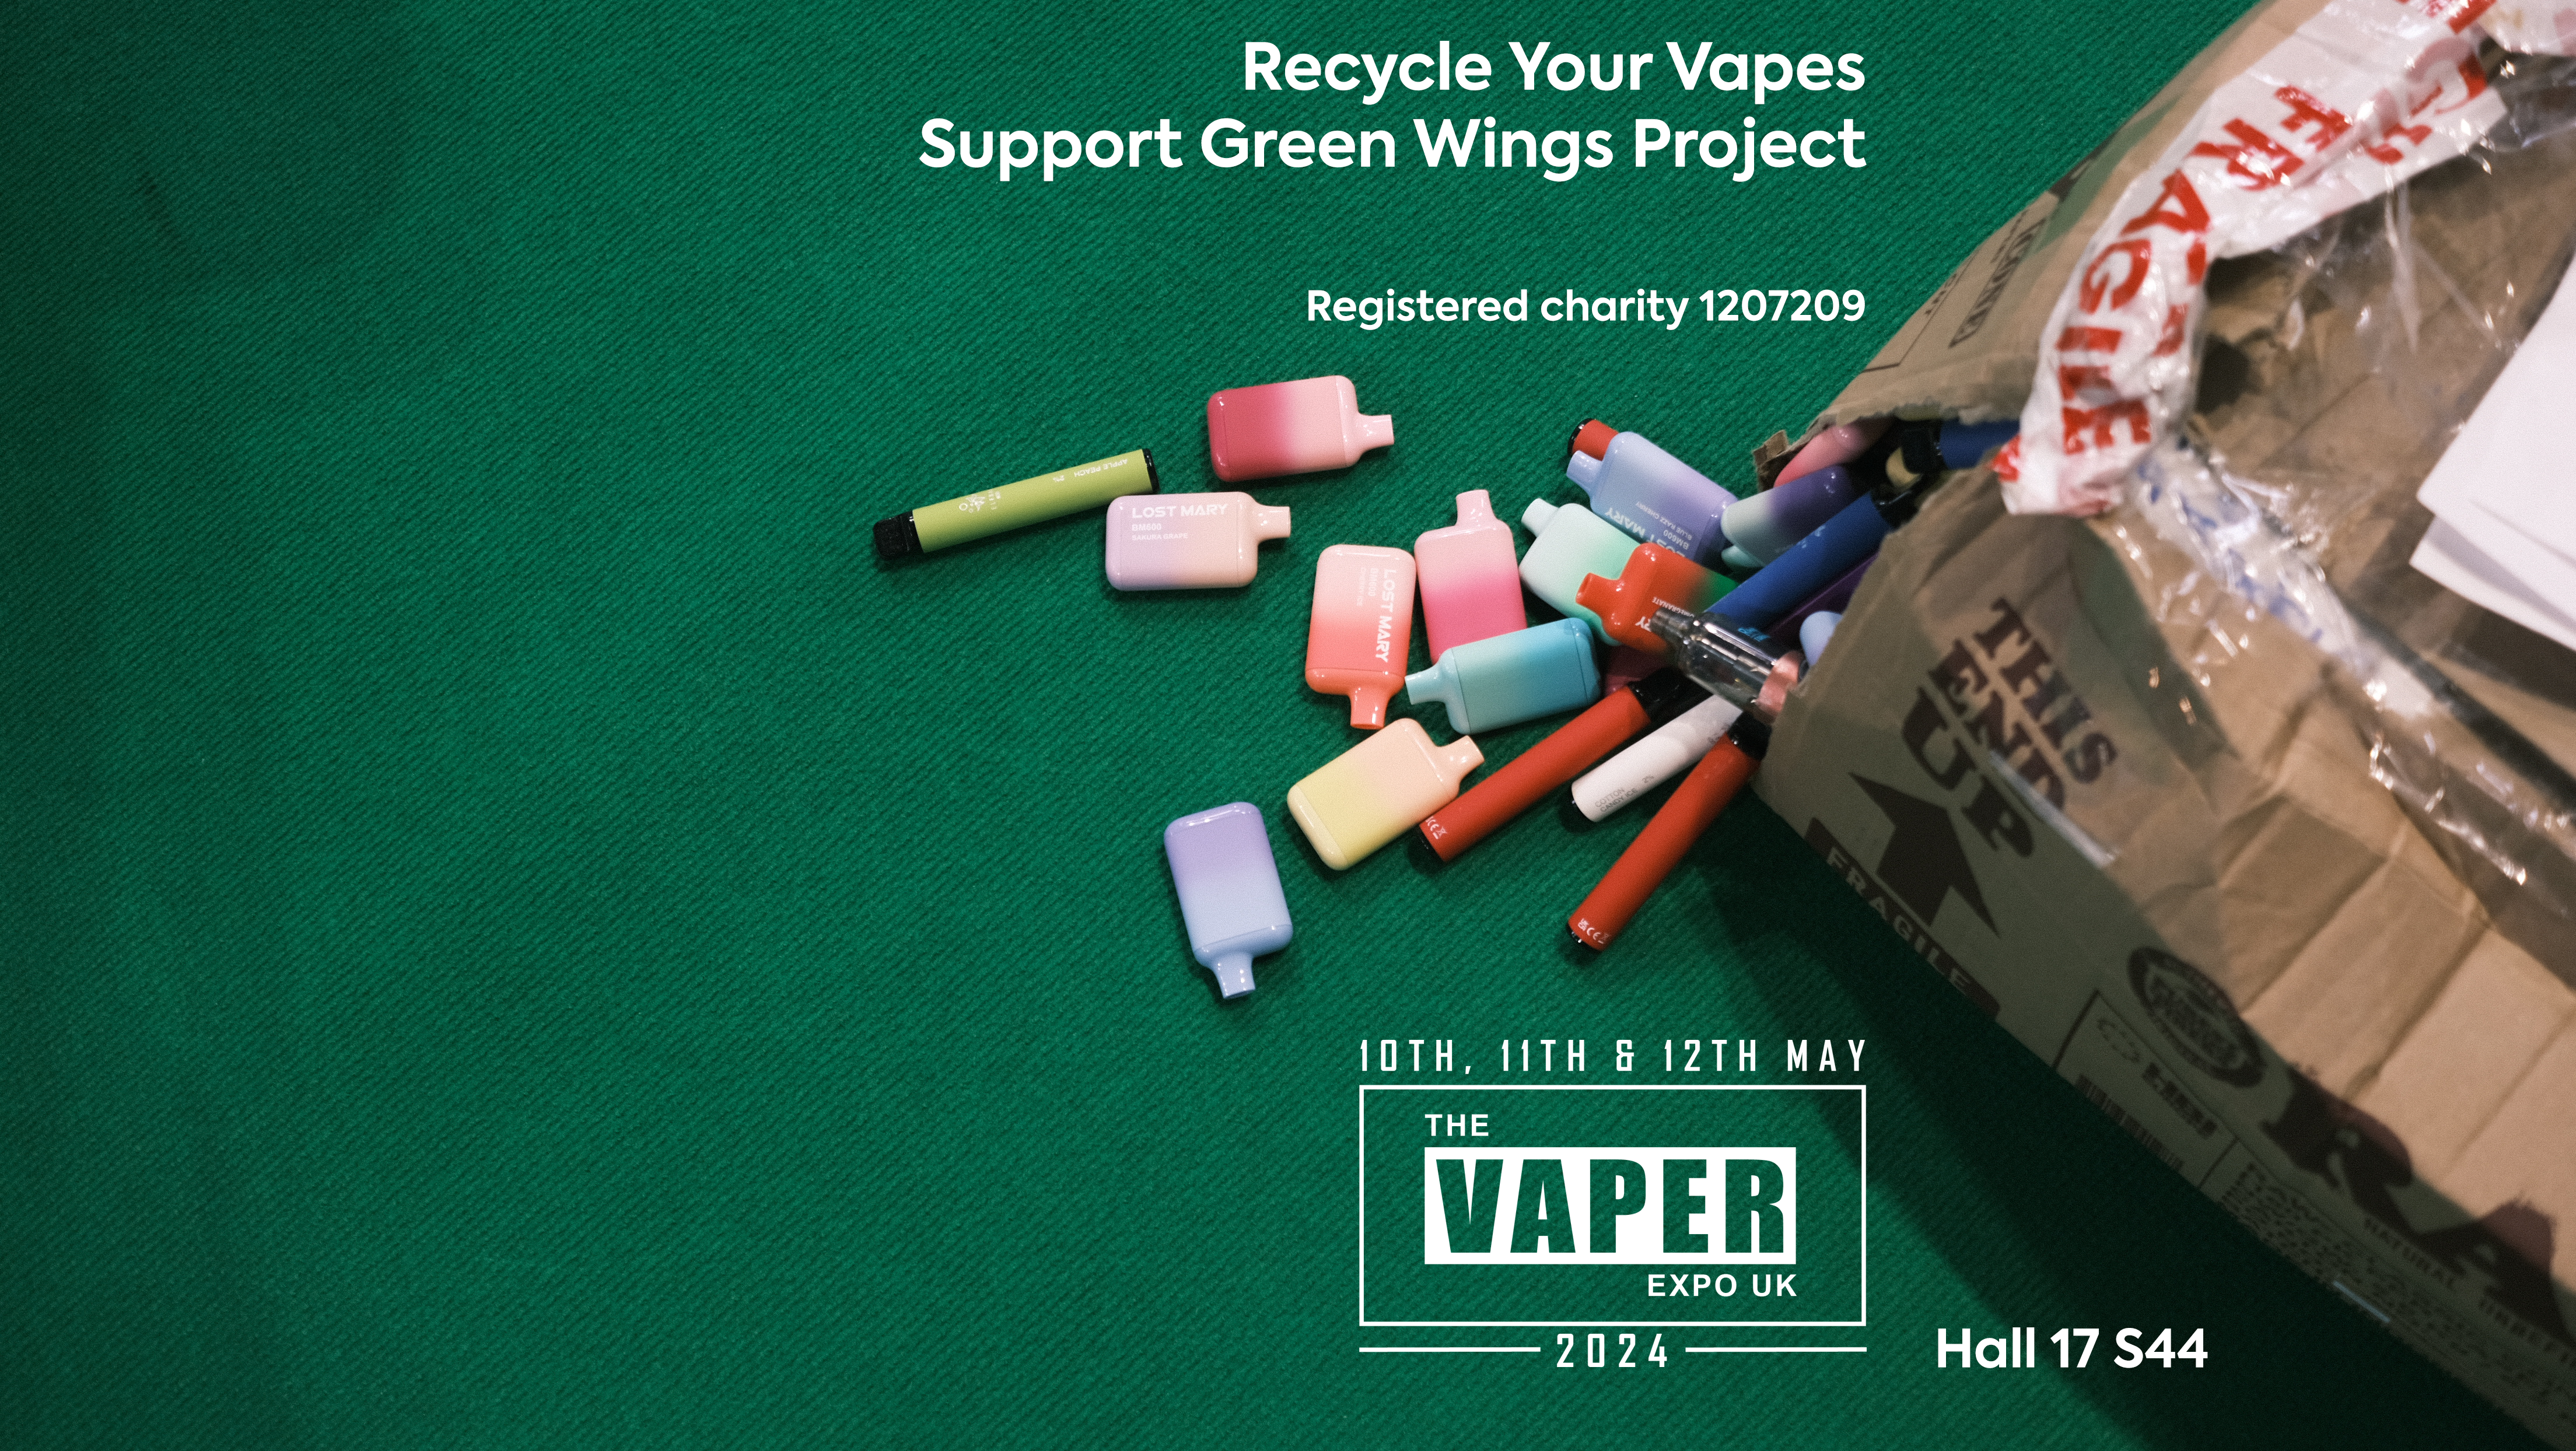 Green Wings Project is enjoying significant progress as shown by our debut as a registered charity at Vaper Expo UK 2024, the biggest vape event in Europe.